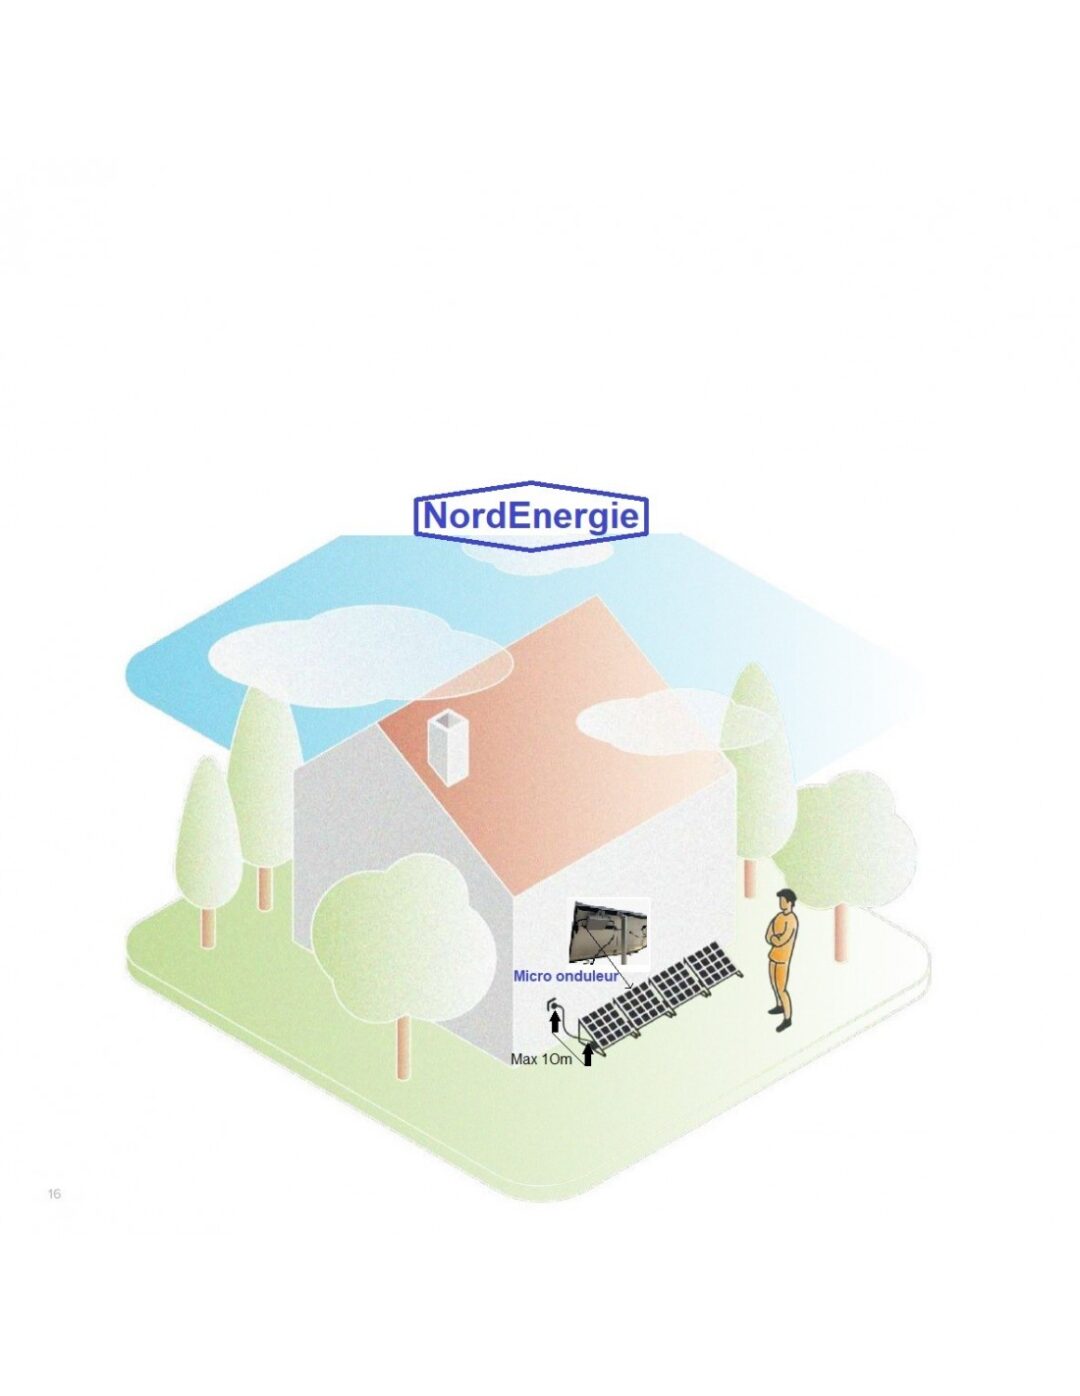 Kit NordEnergie plug and play 720W facile EXTENSIBLE à 3kw